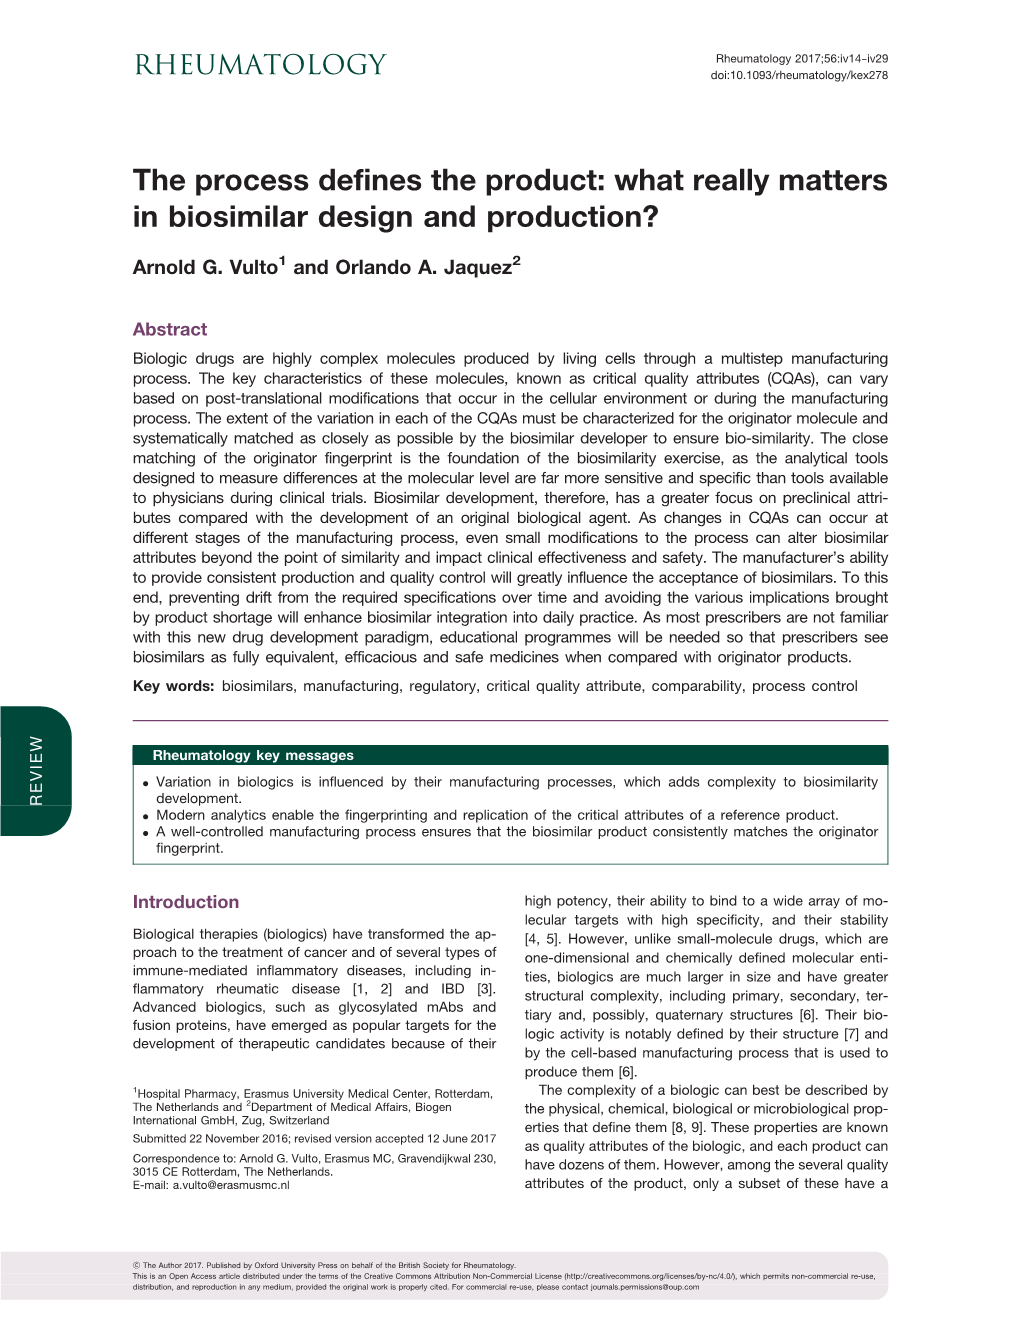 The Process Defines the Product: What Really Matters in Biosimilar Design and Production?